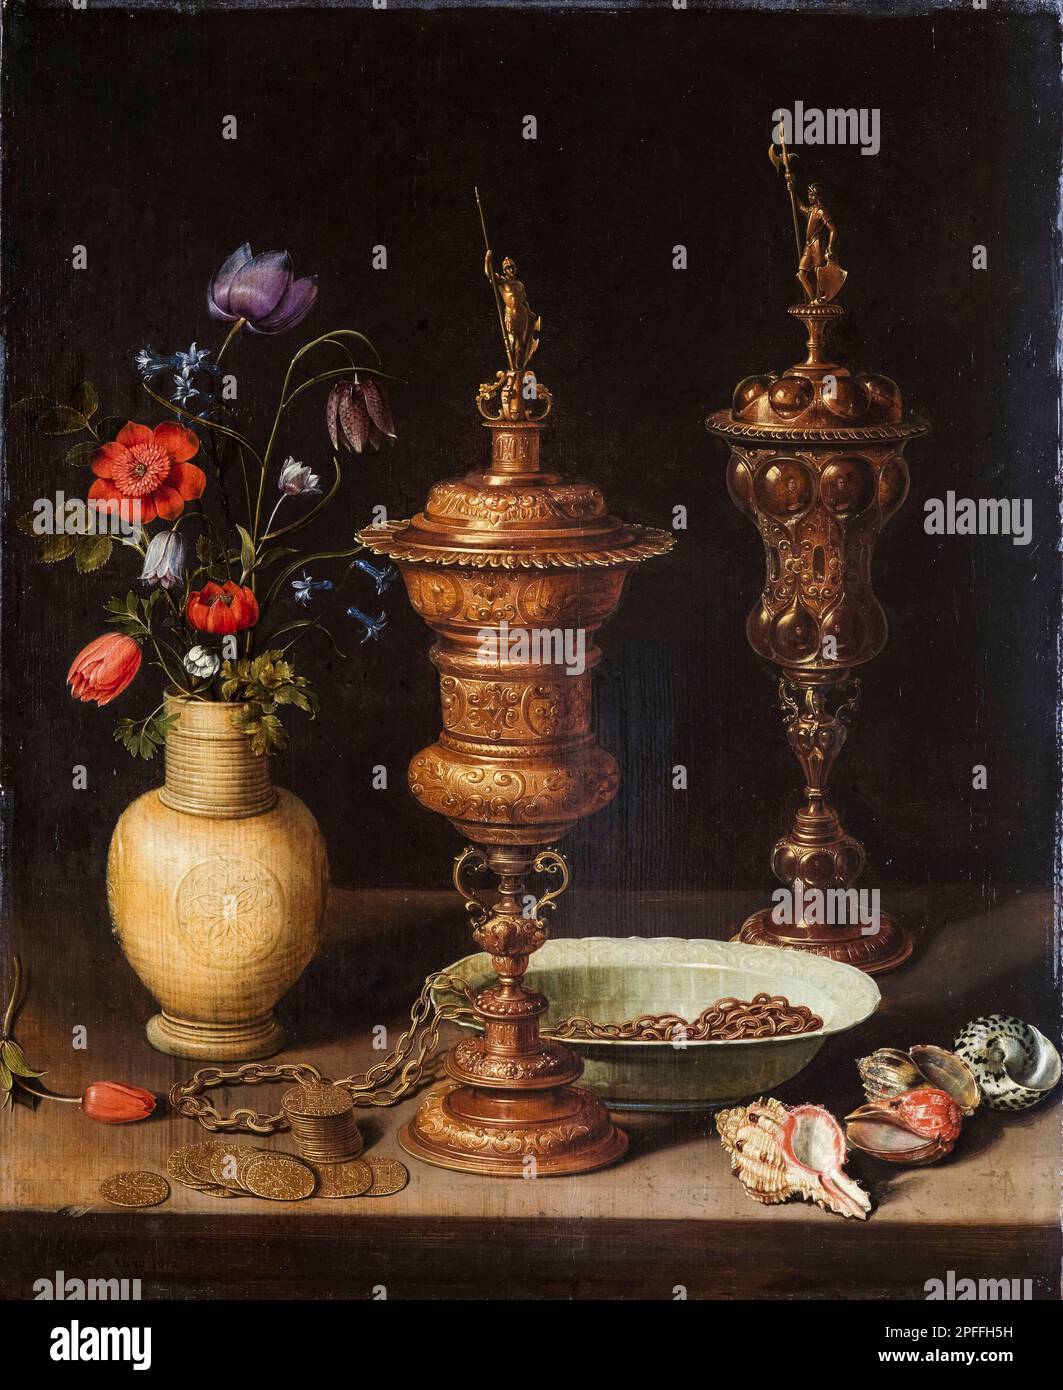 Clara Peeters, Still Life with Flowers and Gold Cups of Honour, pittura in olio su legno, 1612 Foto Stock